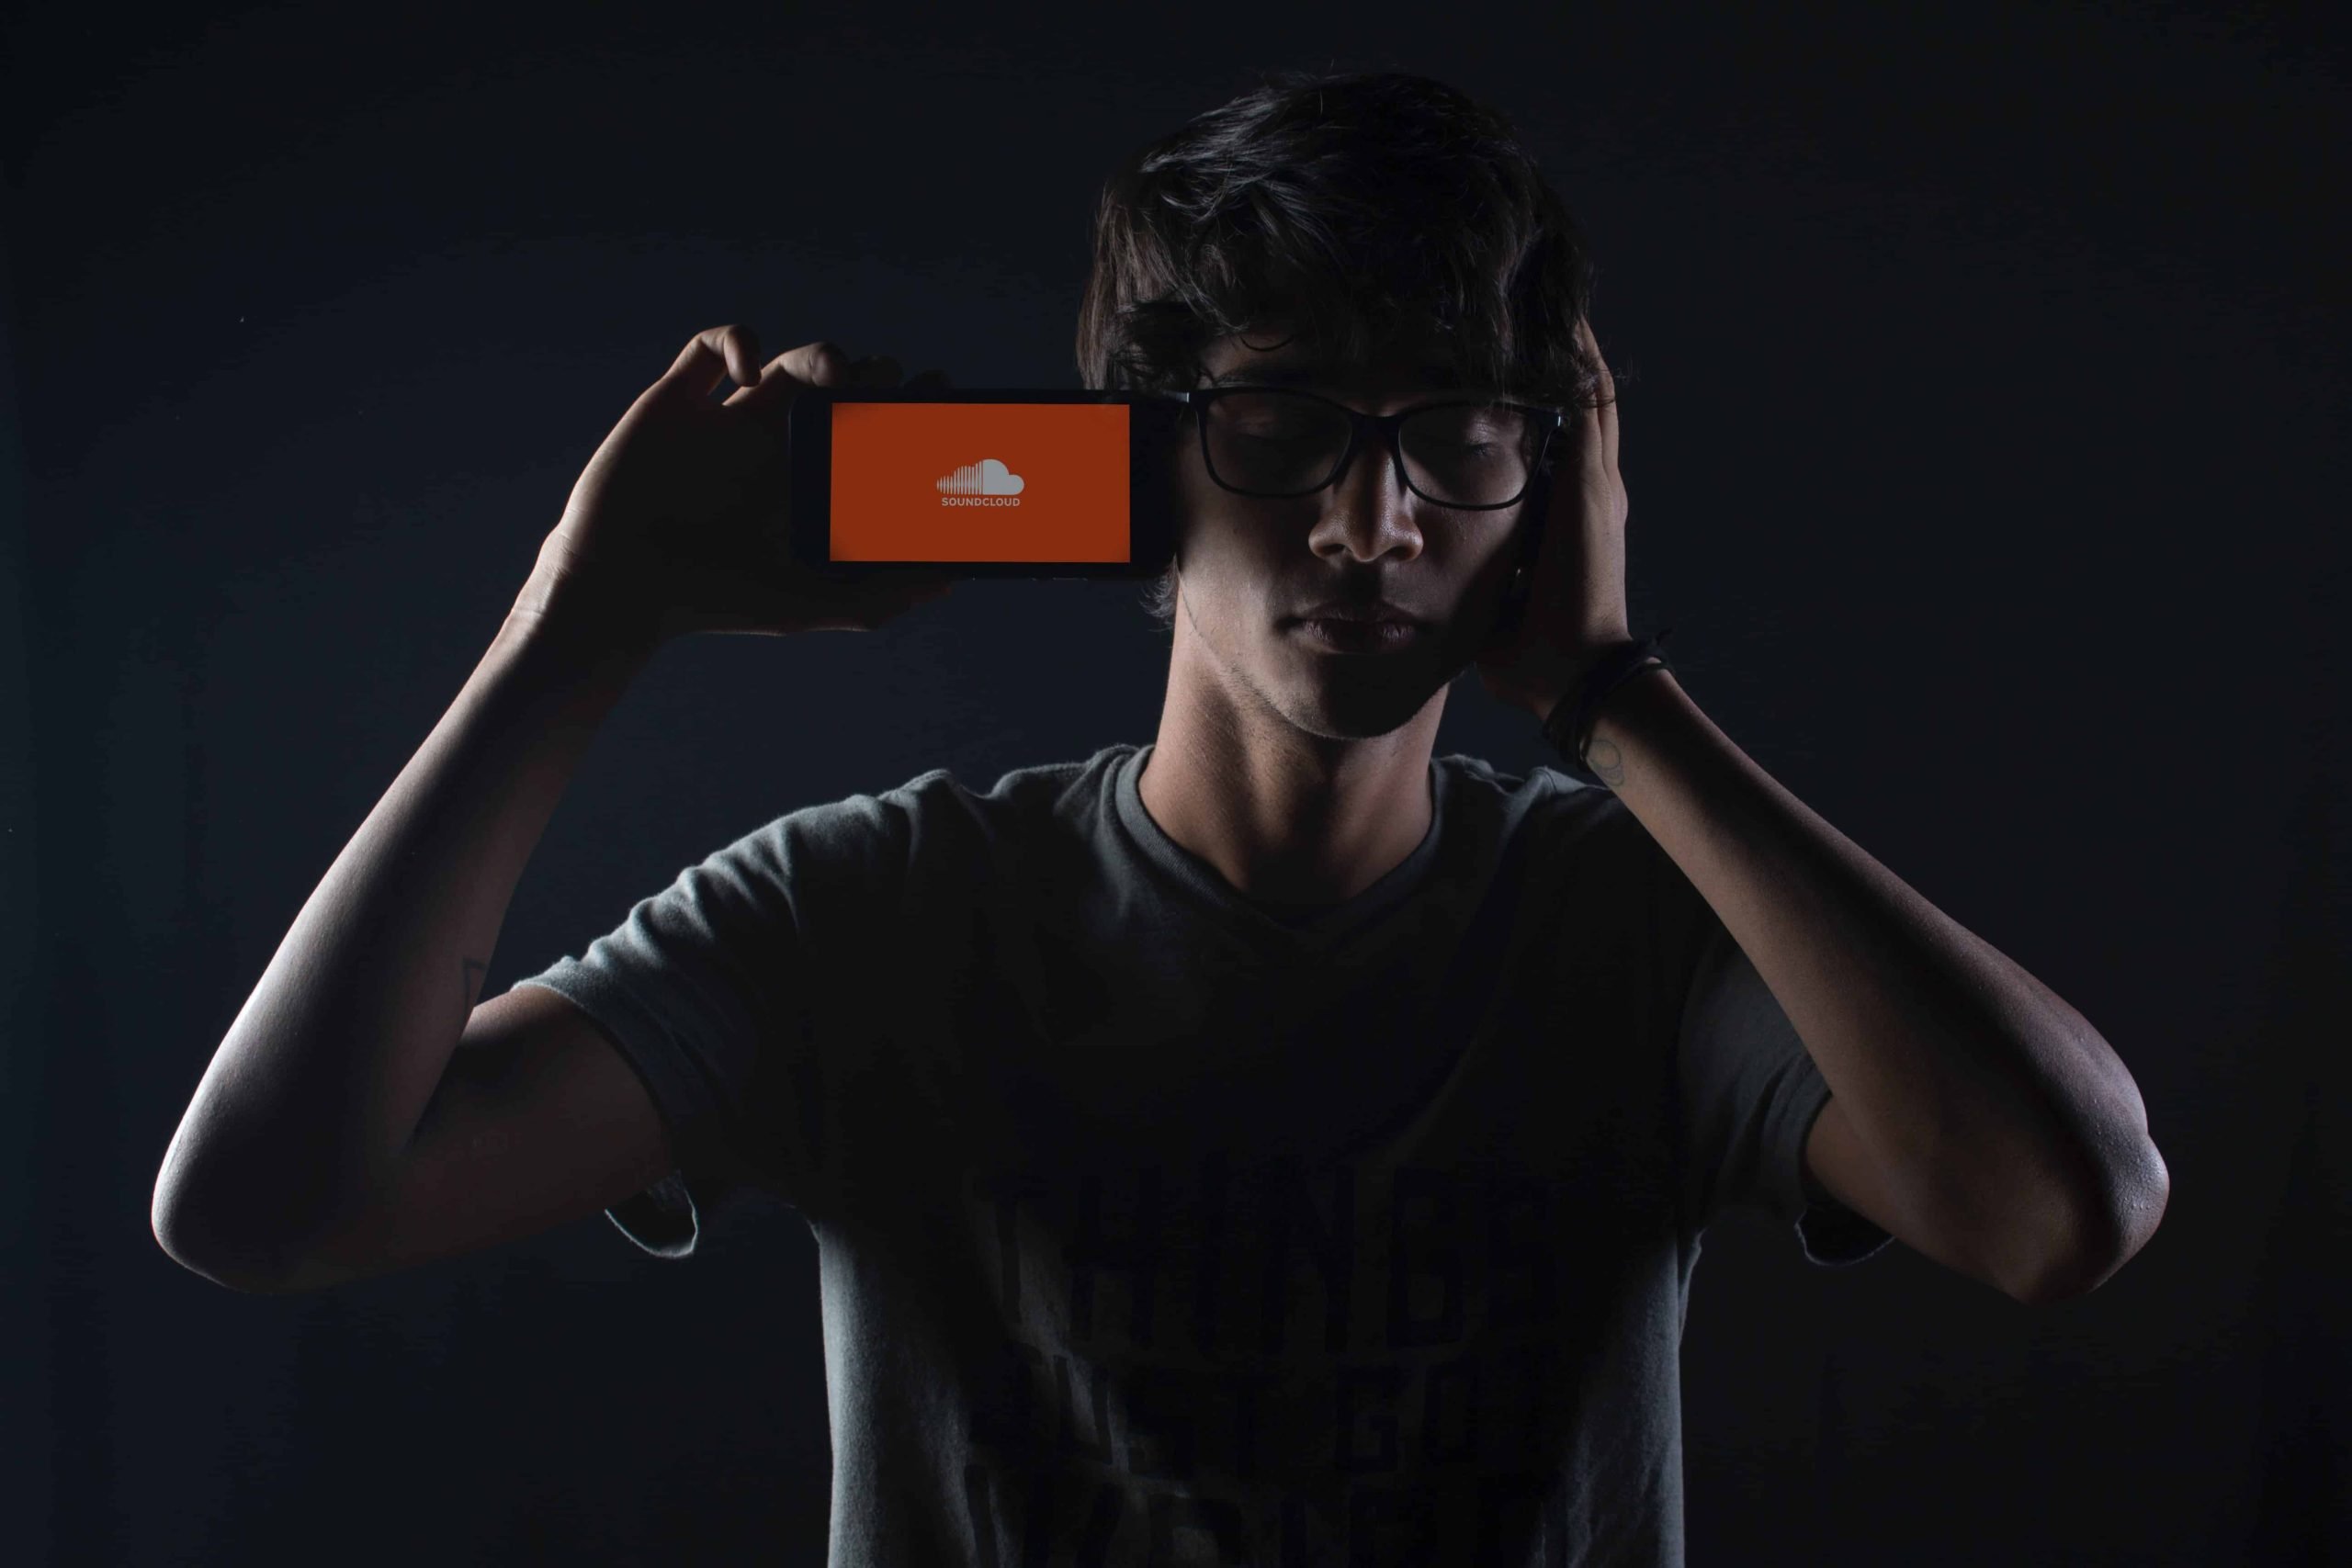 5 ways to get your music noticed on SoundCloud